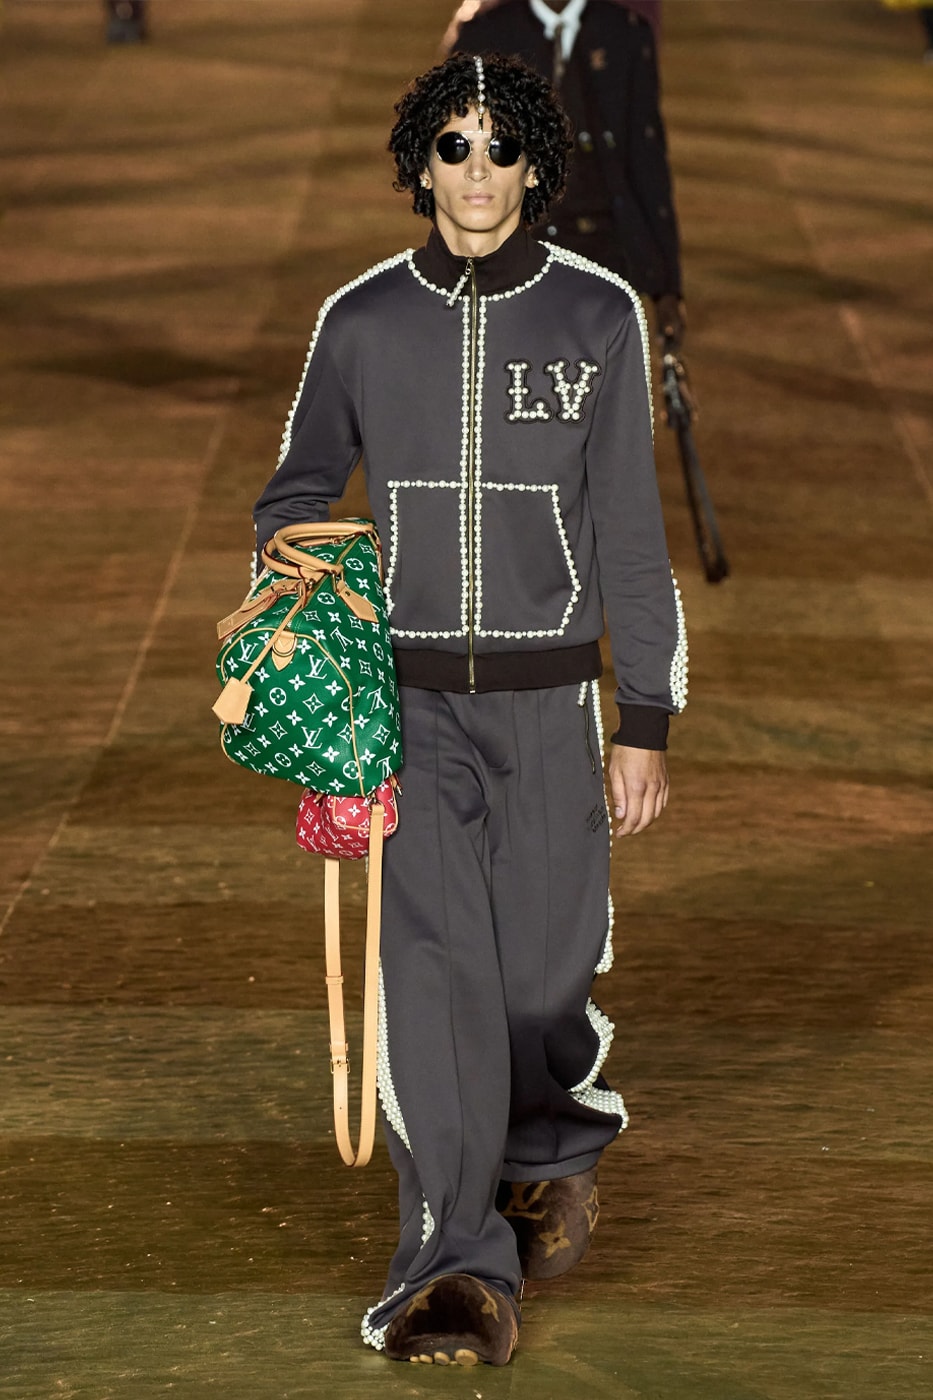 I already know that I'll love the Louis Vuitton Spring Summer 2021